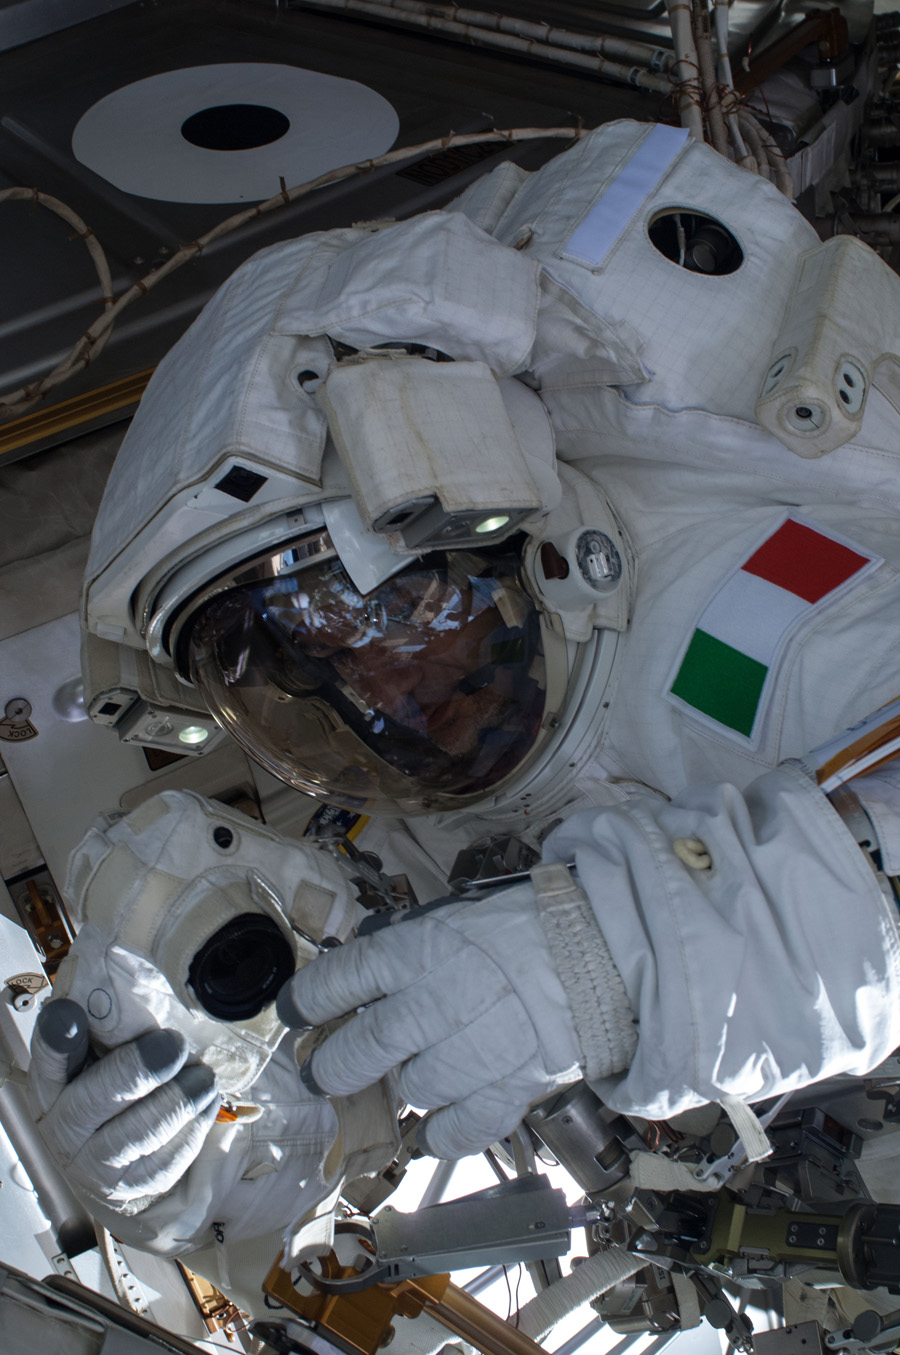 ESA astronaut Luca Parmitano works on the International Space Station in a July 16, 2013 spacewalk.  A little more than one hour into the spacewalk, Parmitano reported water floating behind his head inside his helmet.  The water was not an immediate health hazard for Parmitano, but Mission Control decided to end the spacewalk early.  This image was released July 16, 2013.